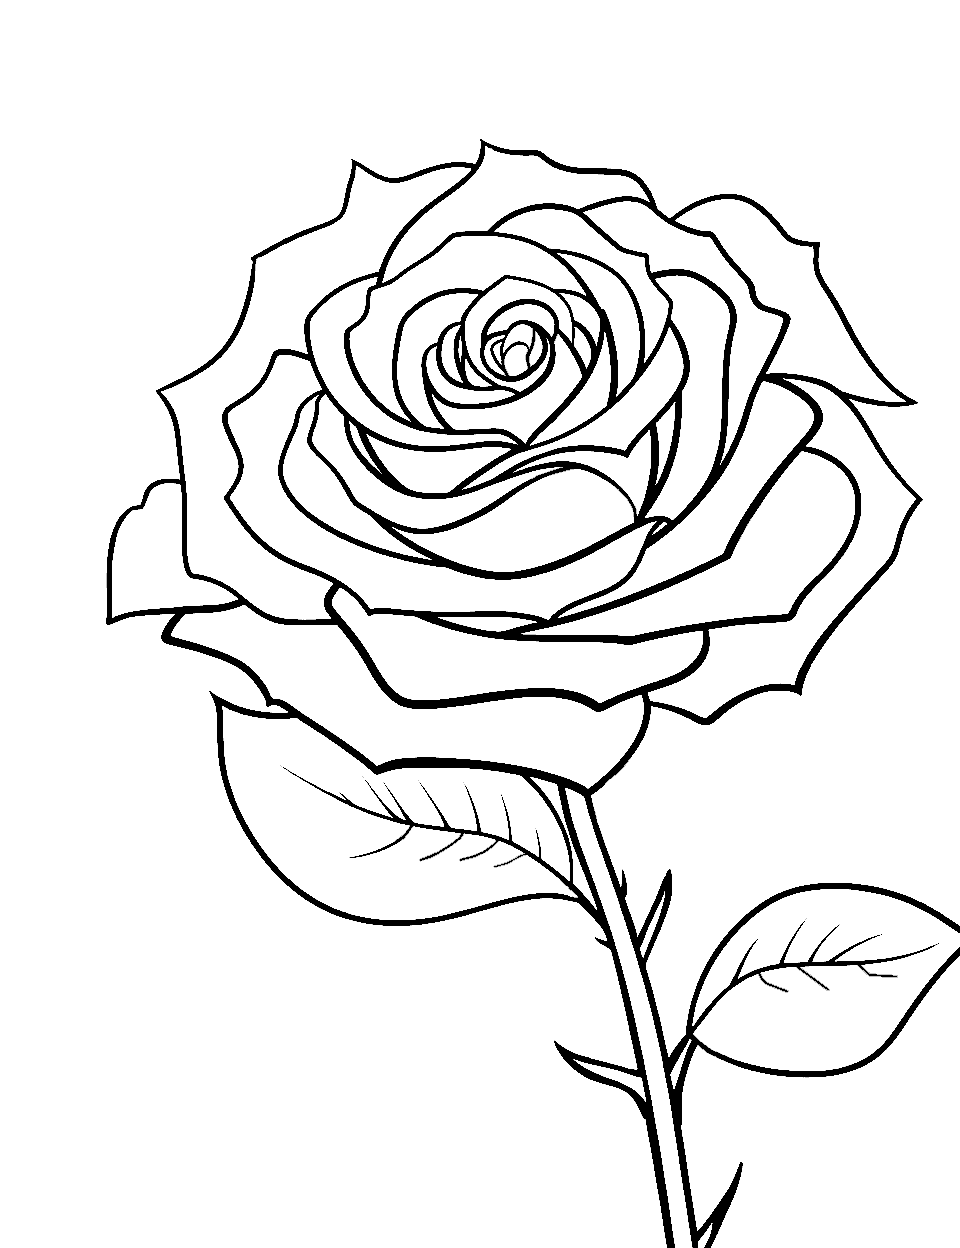 Bright Red Rose Coloring Page - A single, opulent rose in full bloom, symbolizing love and passion.